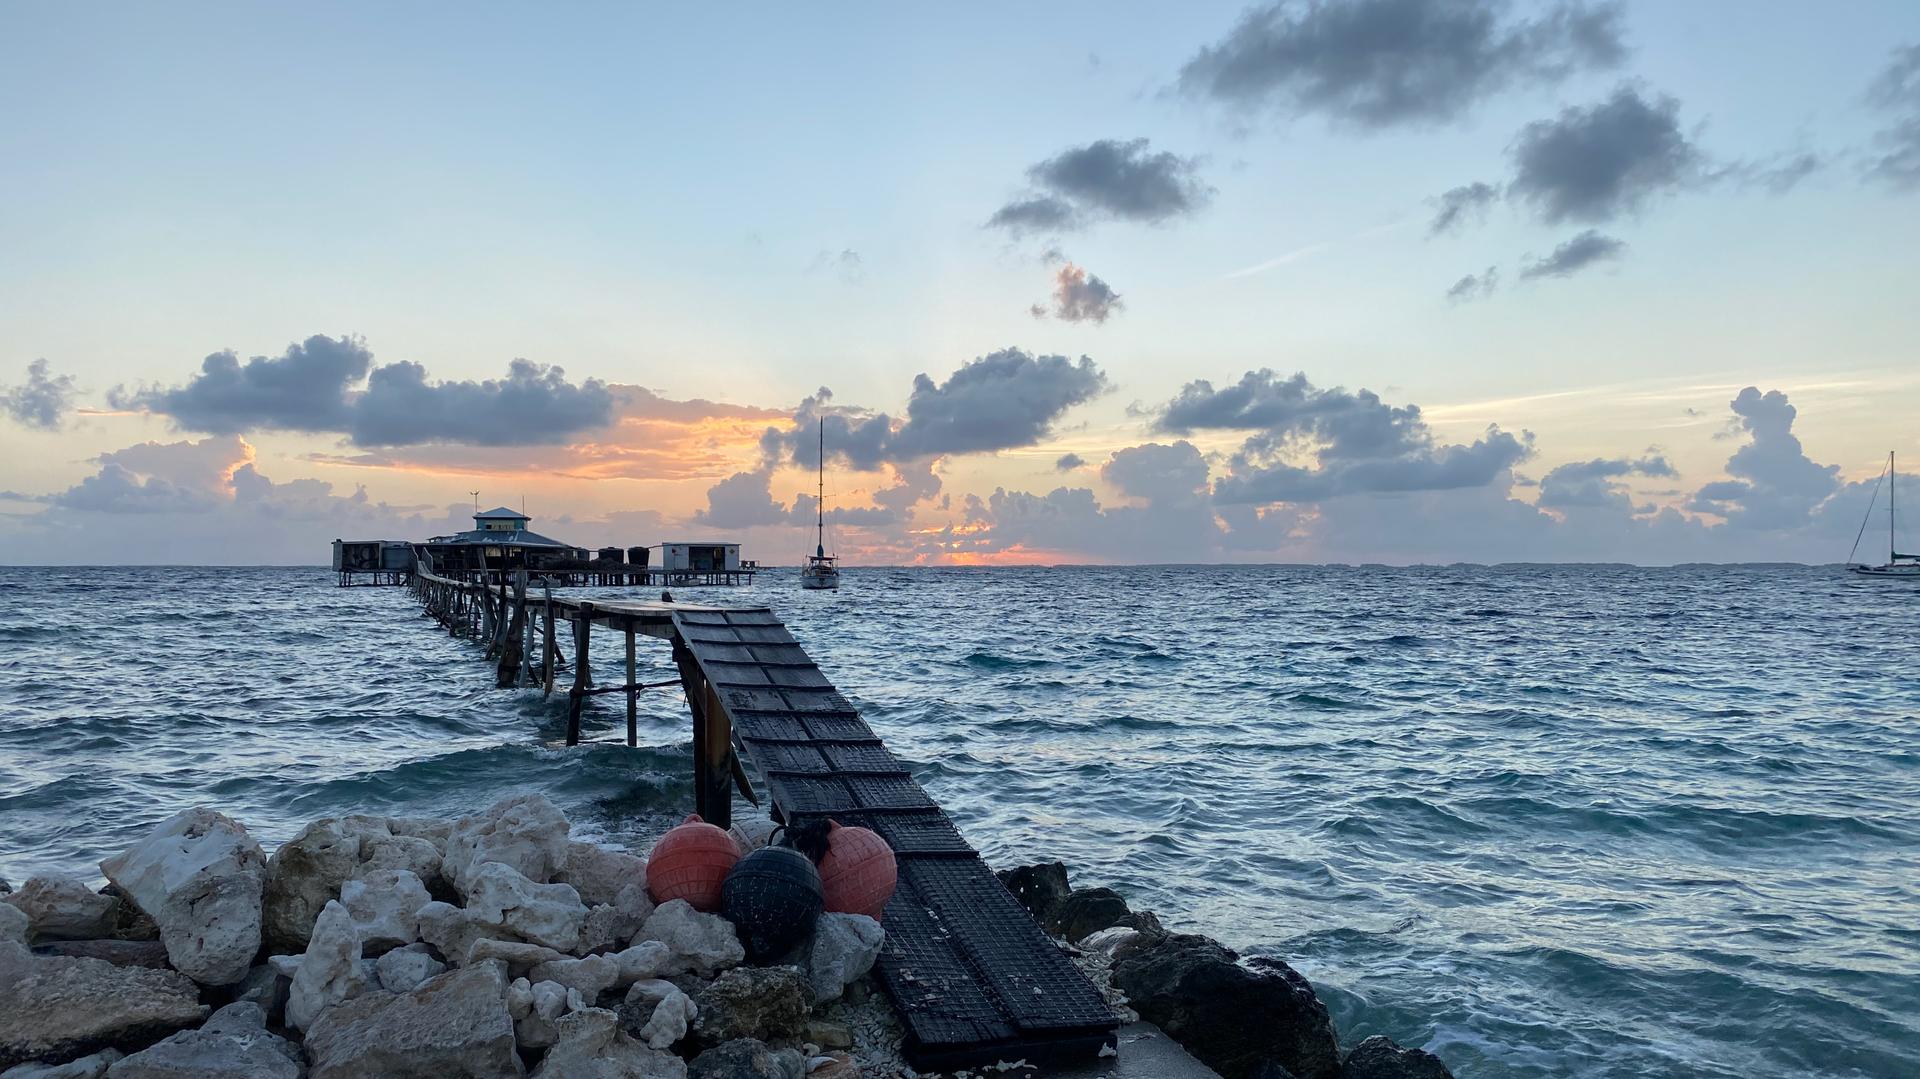 The sun sets on Kamoka Pearl Farm, located on the Ahe Atoll, about 300 miles away from French Polynesia's main island, Tahiti. Owner Josh Humbert says that being environmentally has always been important at this small, family-run pearl production operatio